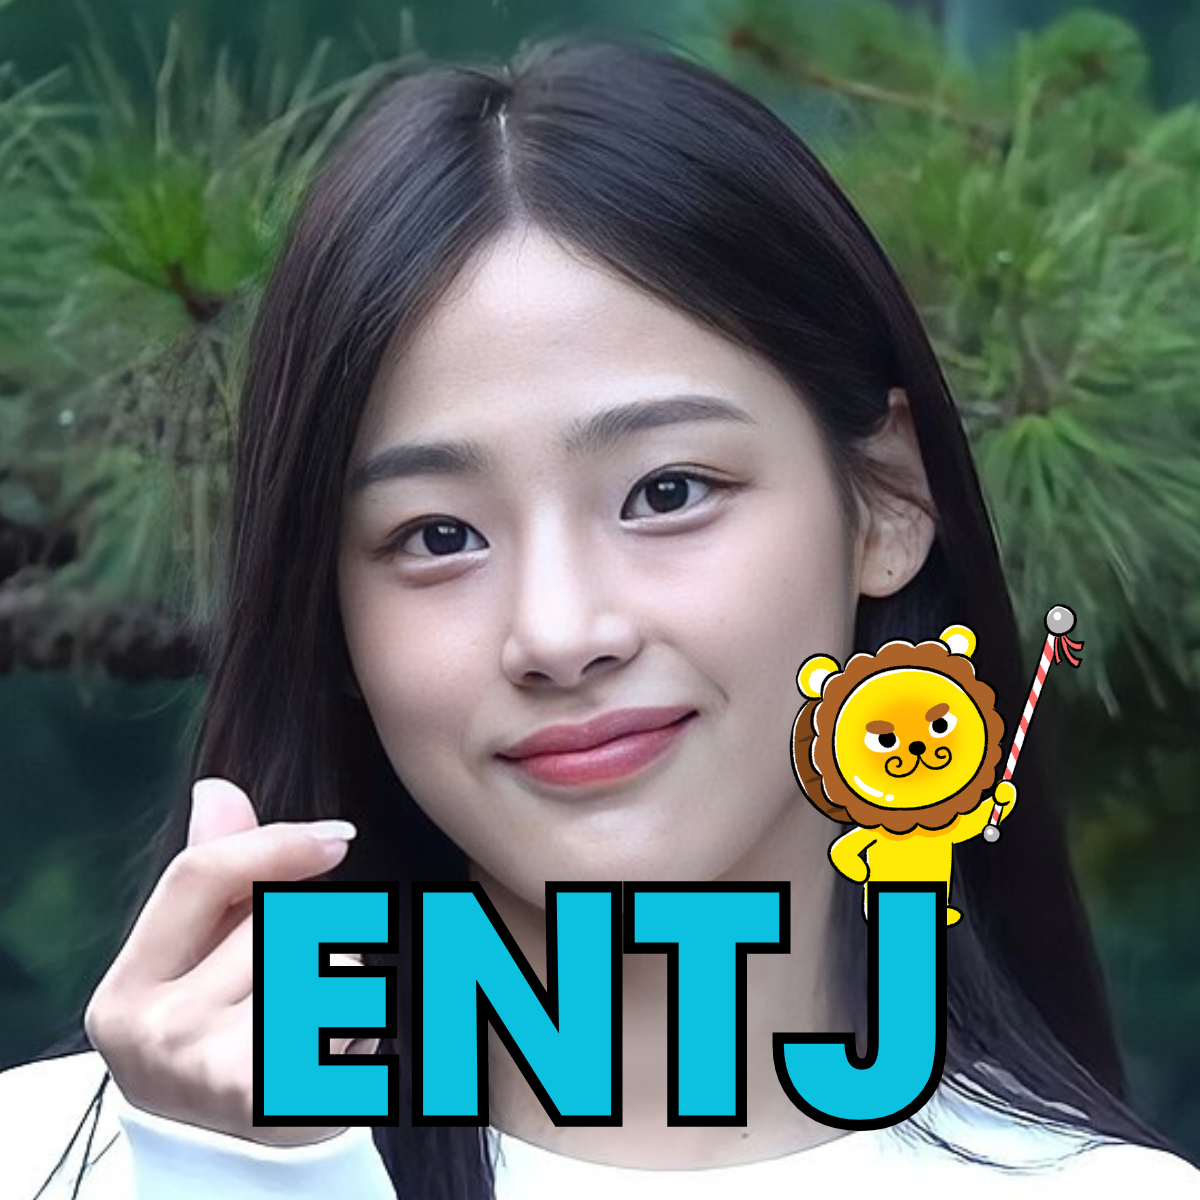 K-Pop idols with INTJ personality, learn more about their MBTI